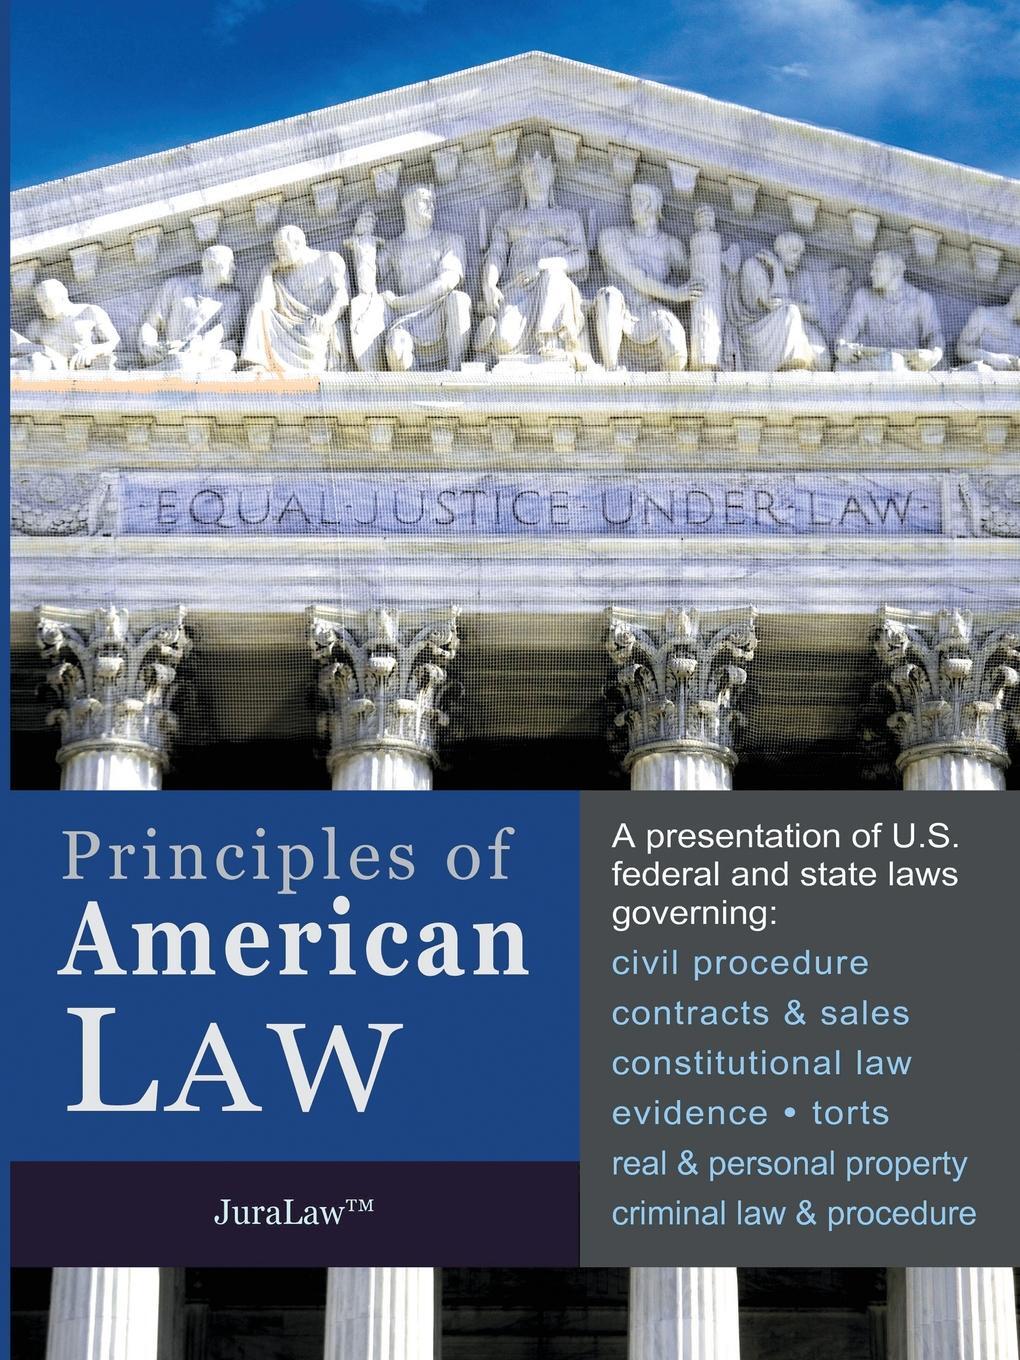 American law. Principles of Law. American Law an Introduction. General principles of Law. Introduction to Law.